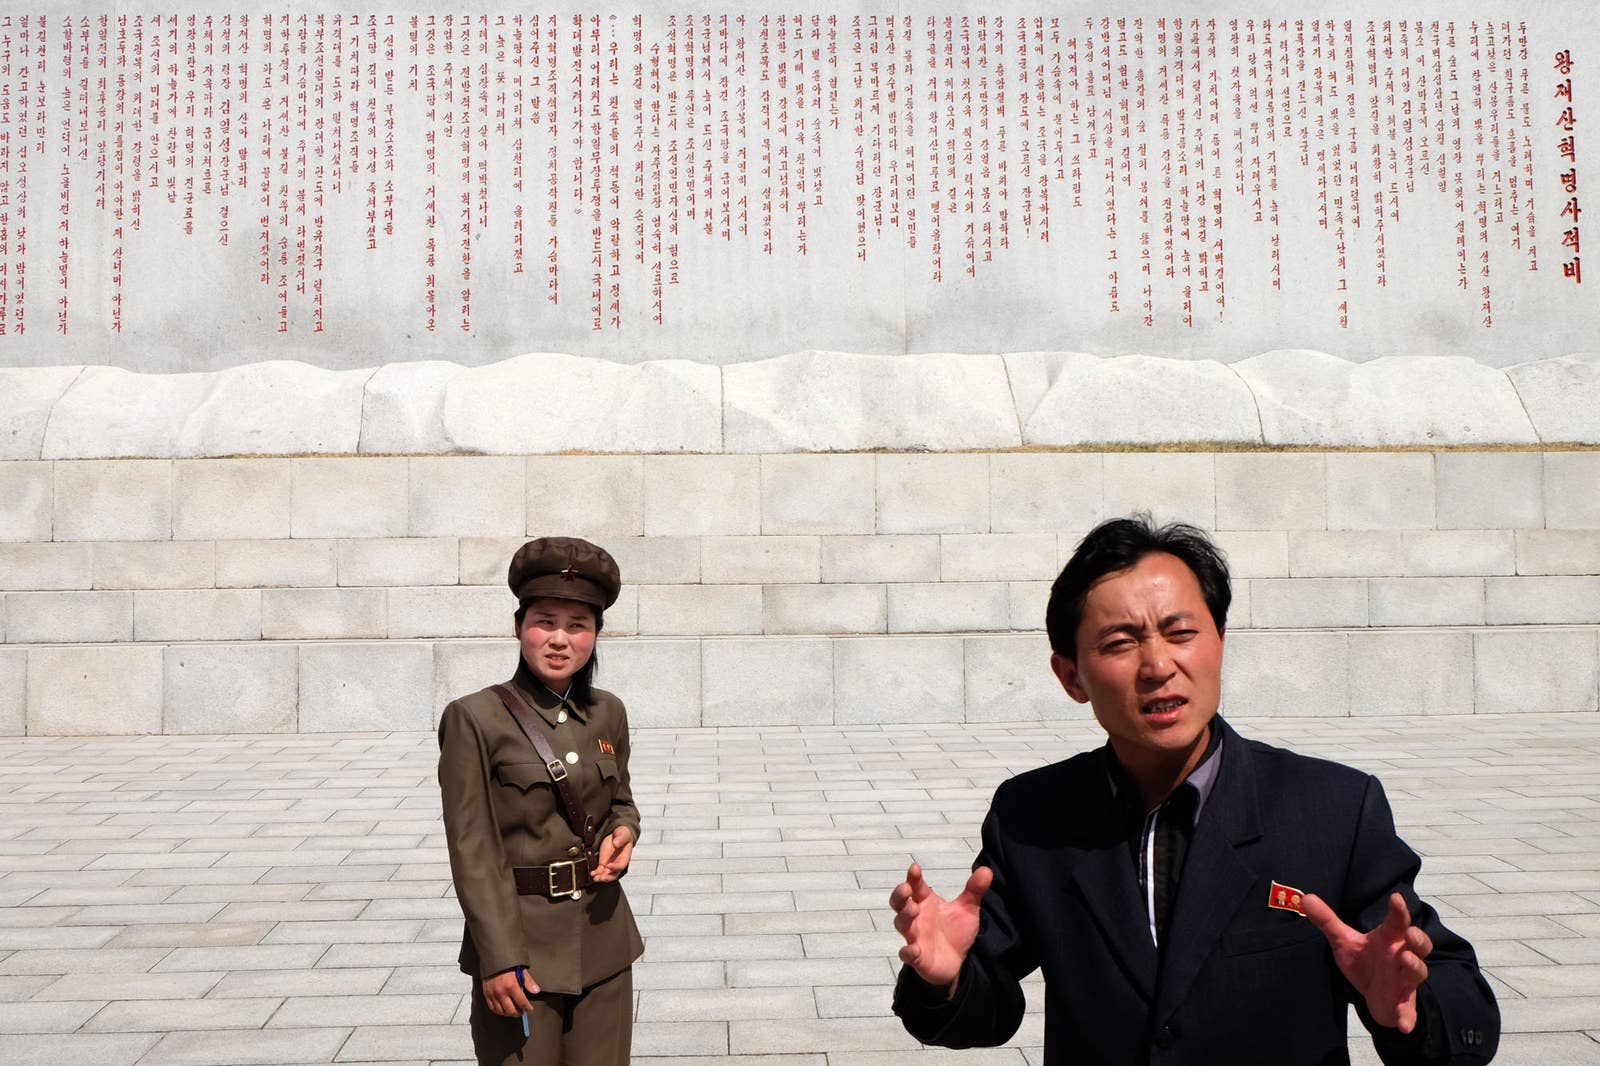 A guide translates a female soldier's comments about the Wangjaesan Monument in North Hamgyong province.